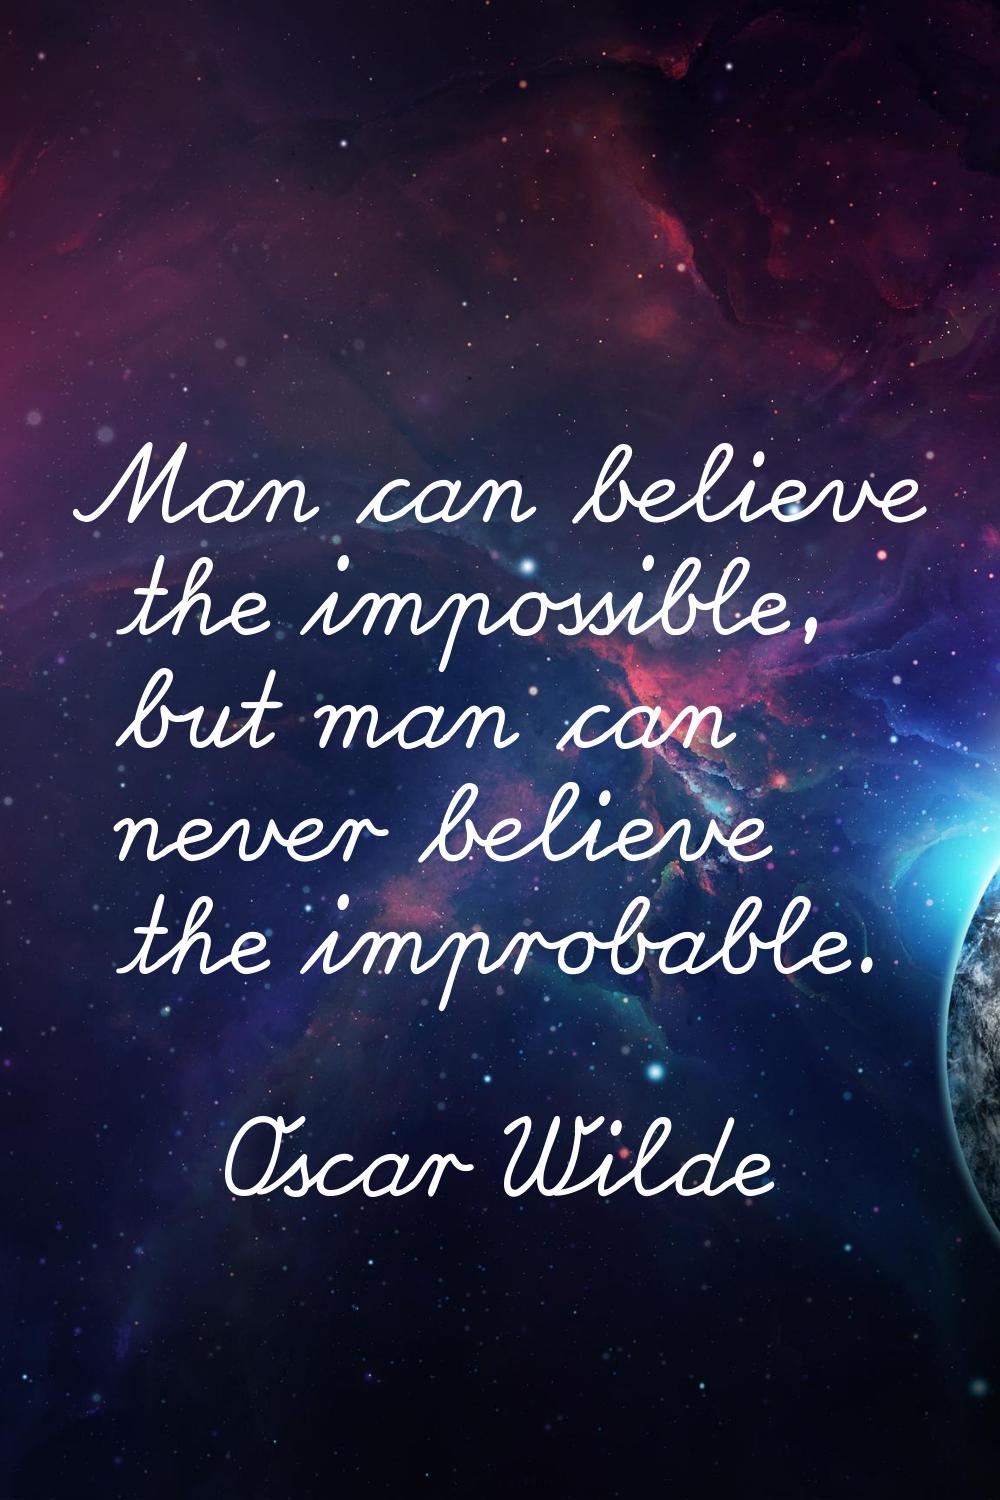 Man can believe the impossible, but man can never believe the improbable.